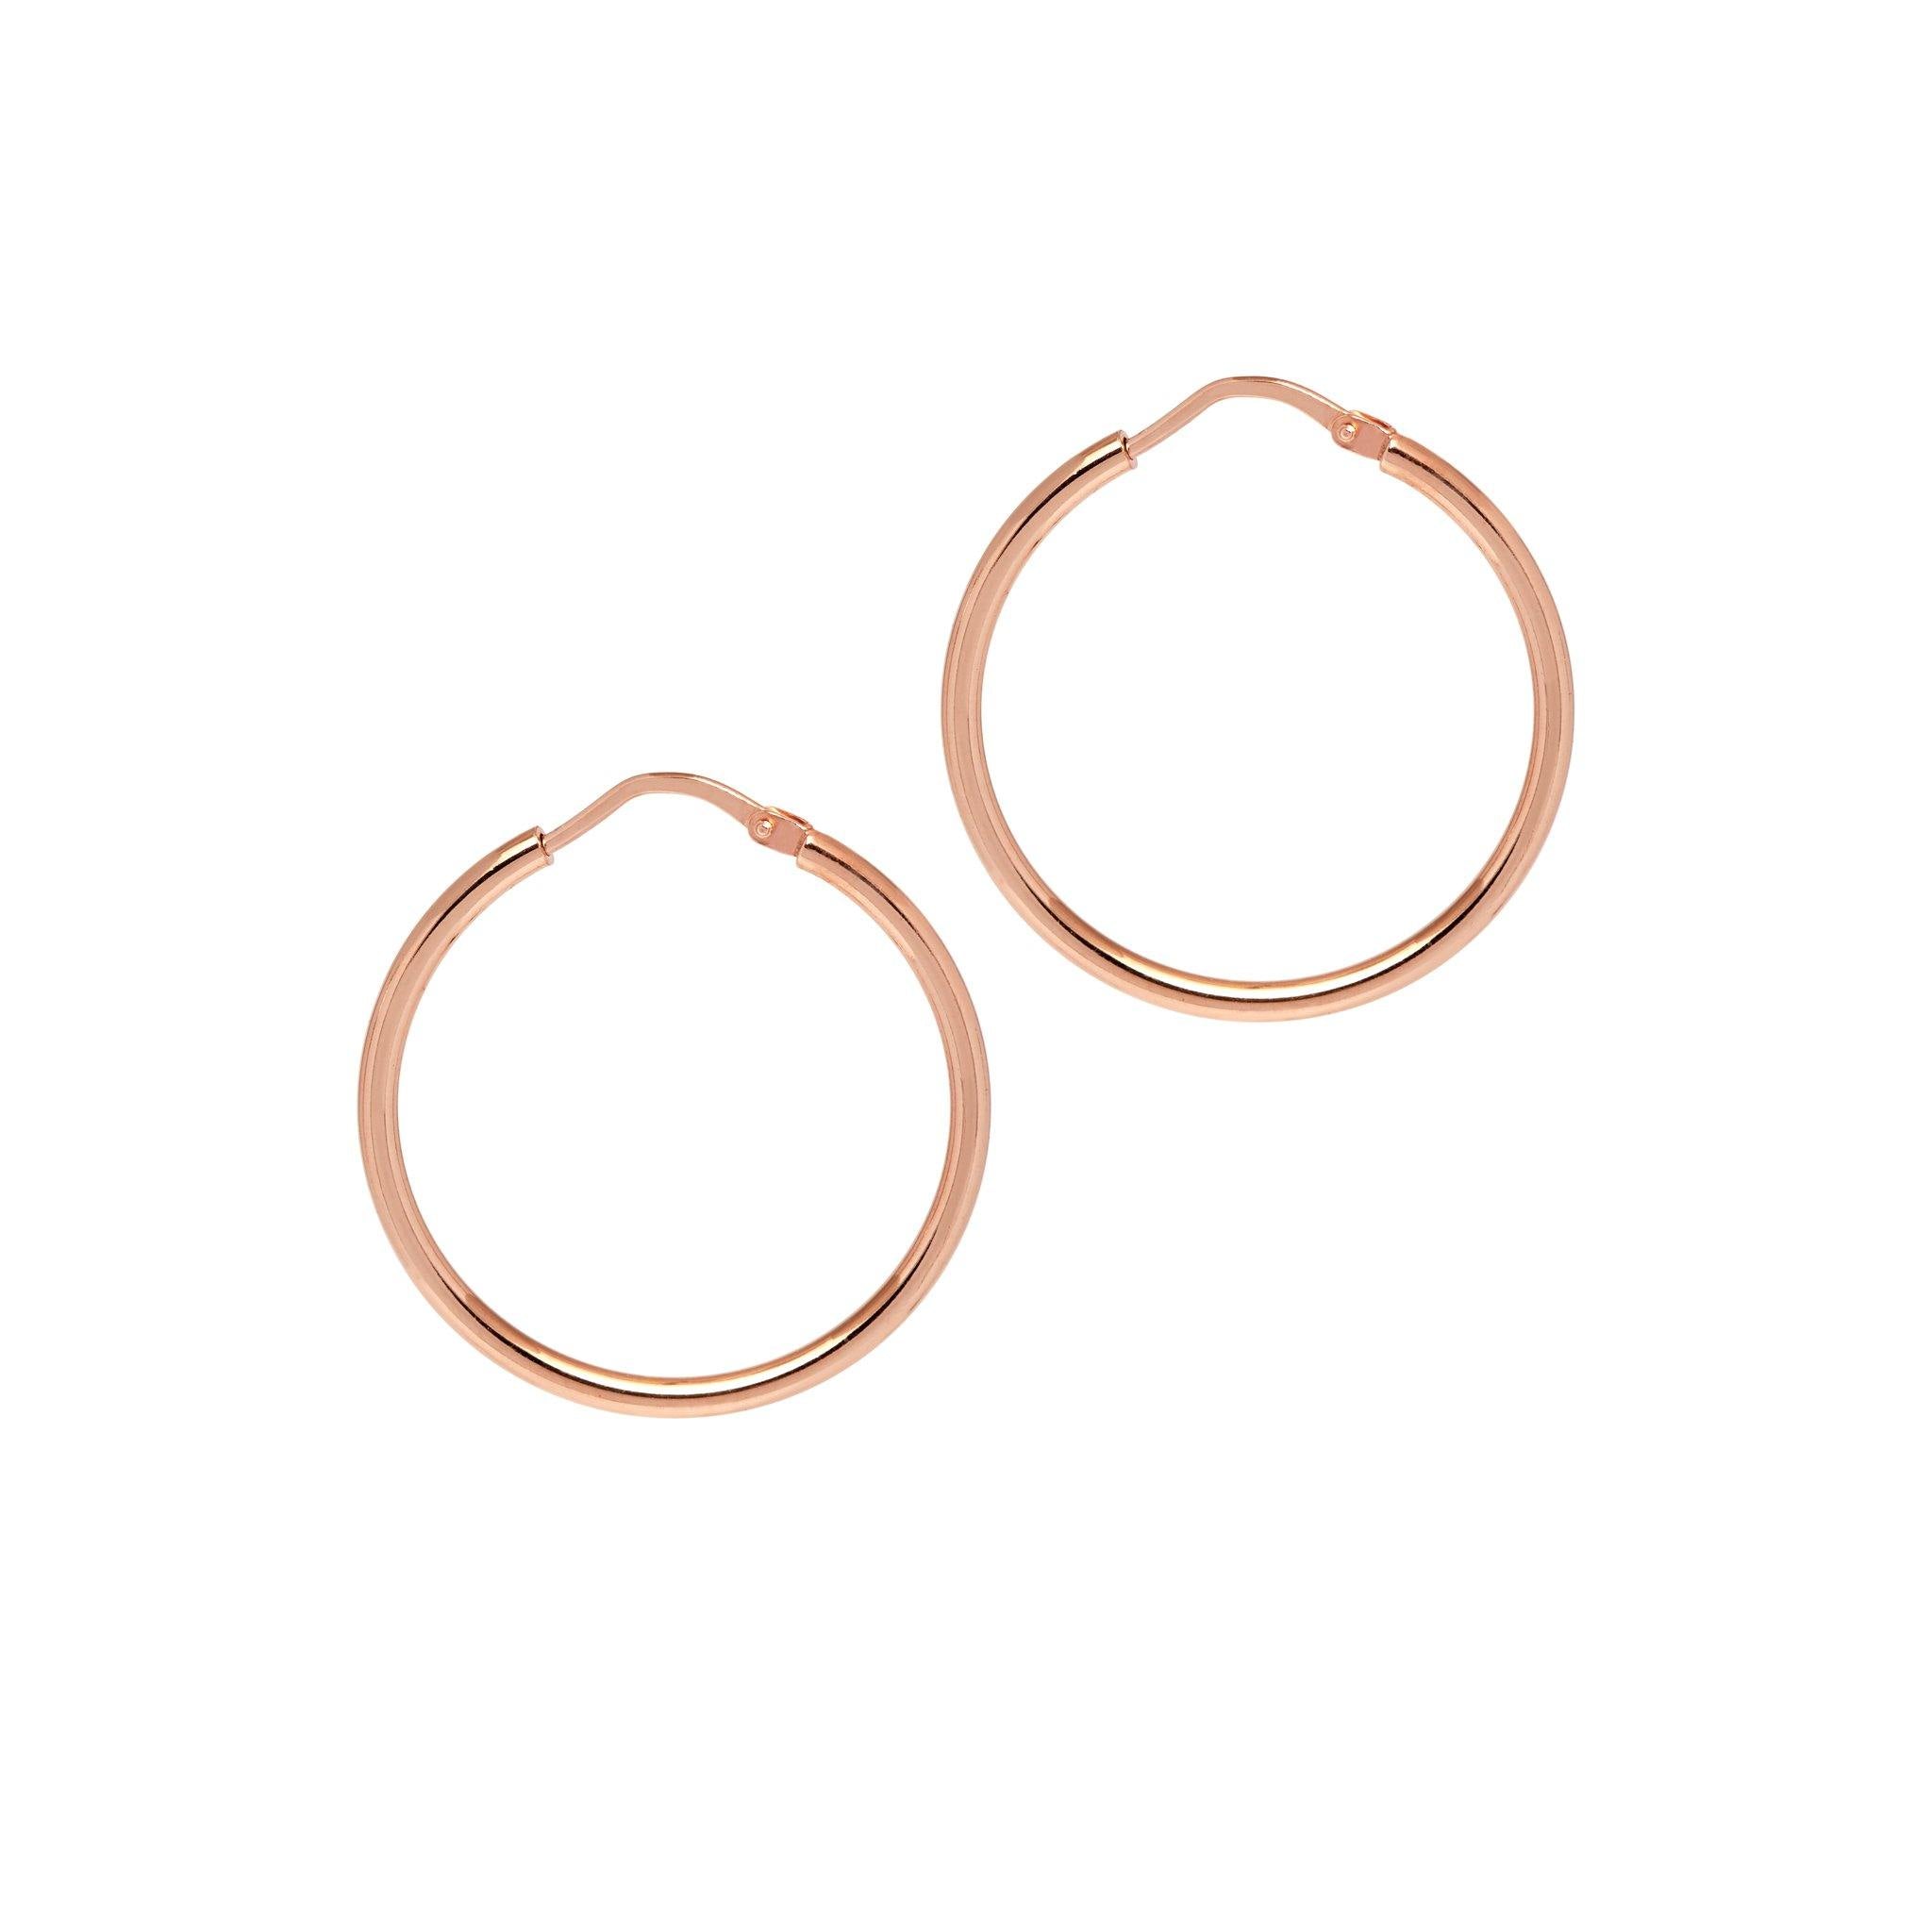 Chica Latina - Small - Rose Gold - THE HOOP STATION